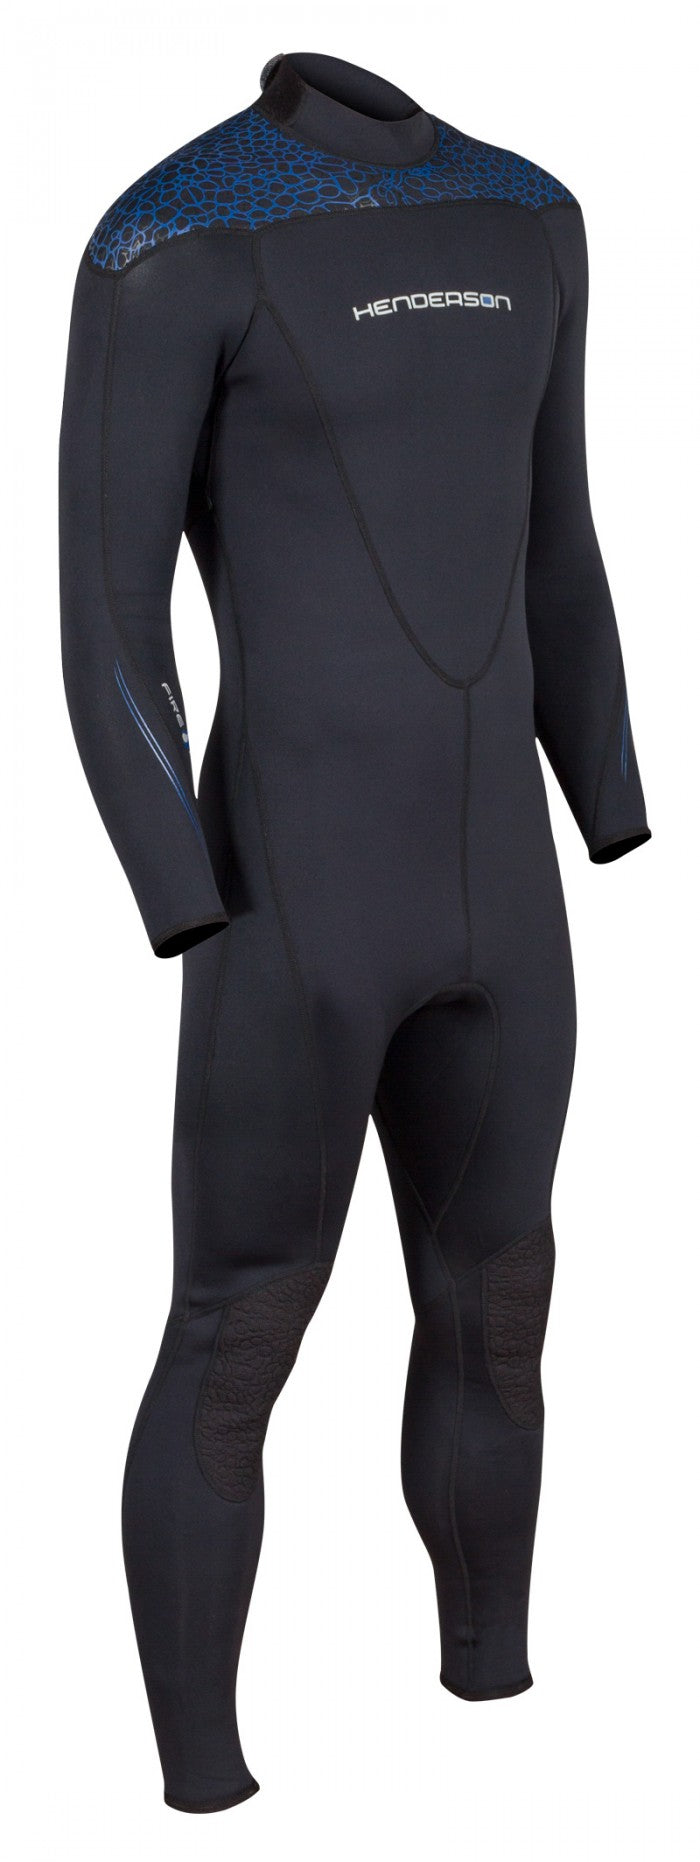 right side of Black / Blue Wetsuit